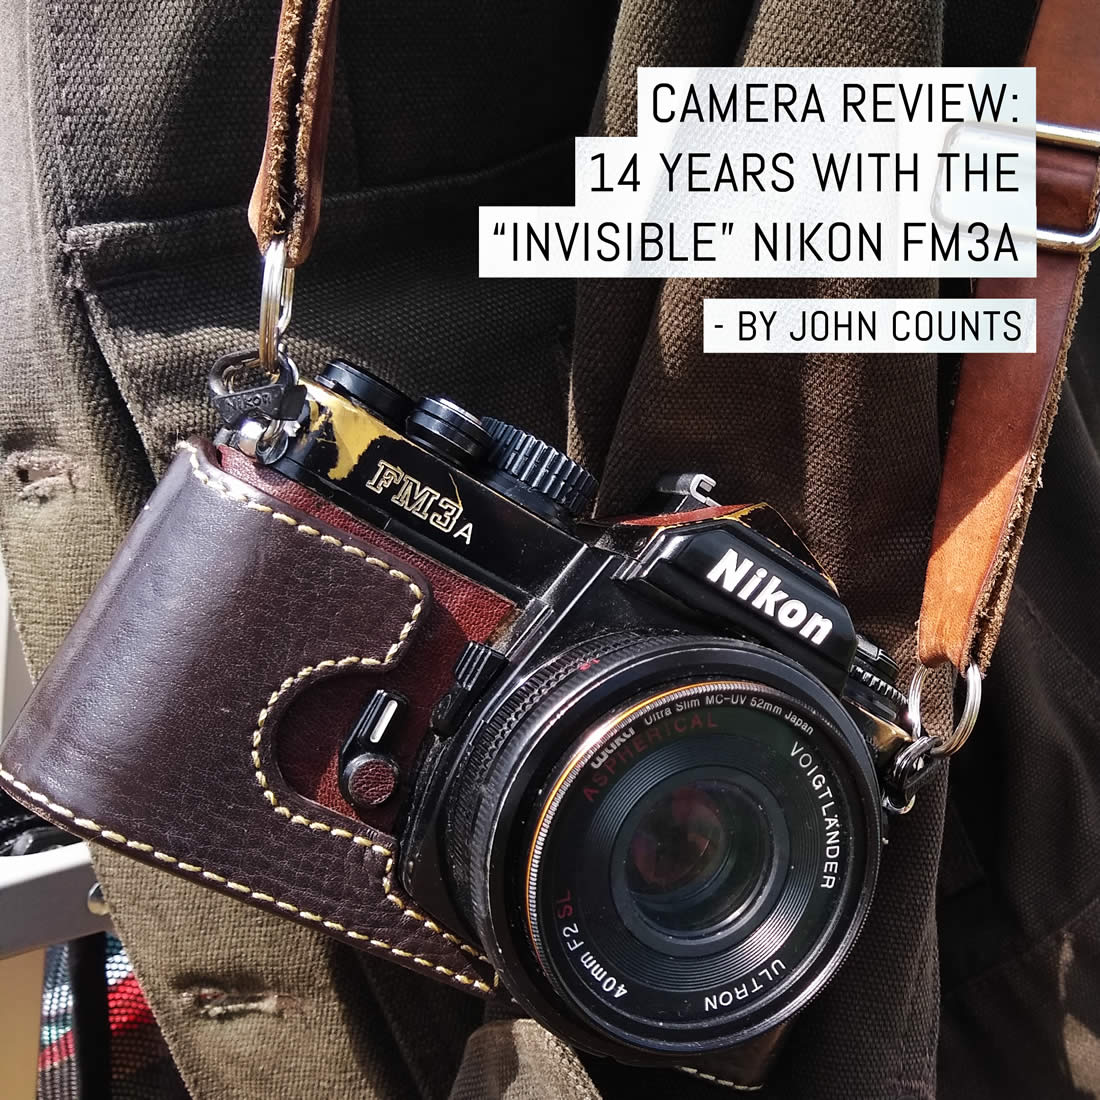 Camera review: 14 years with the “invisible” Nikon FM3a